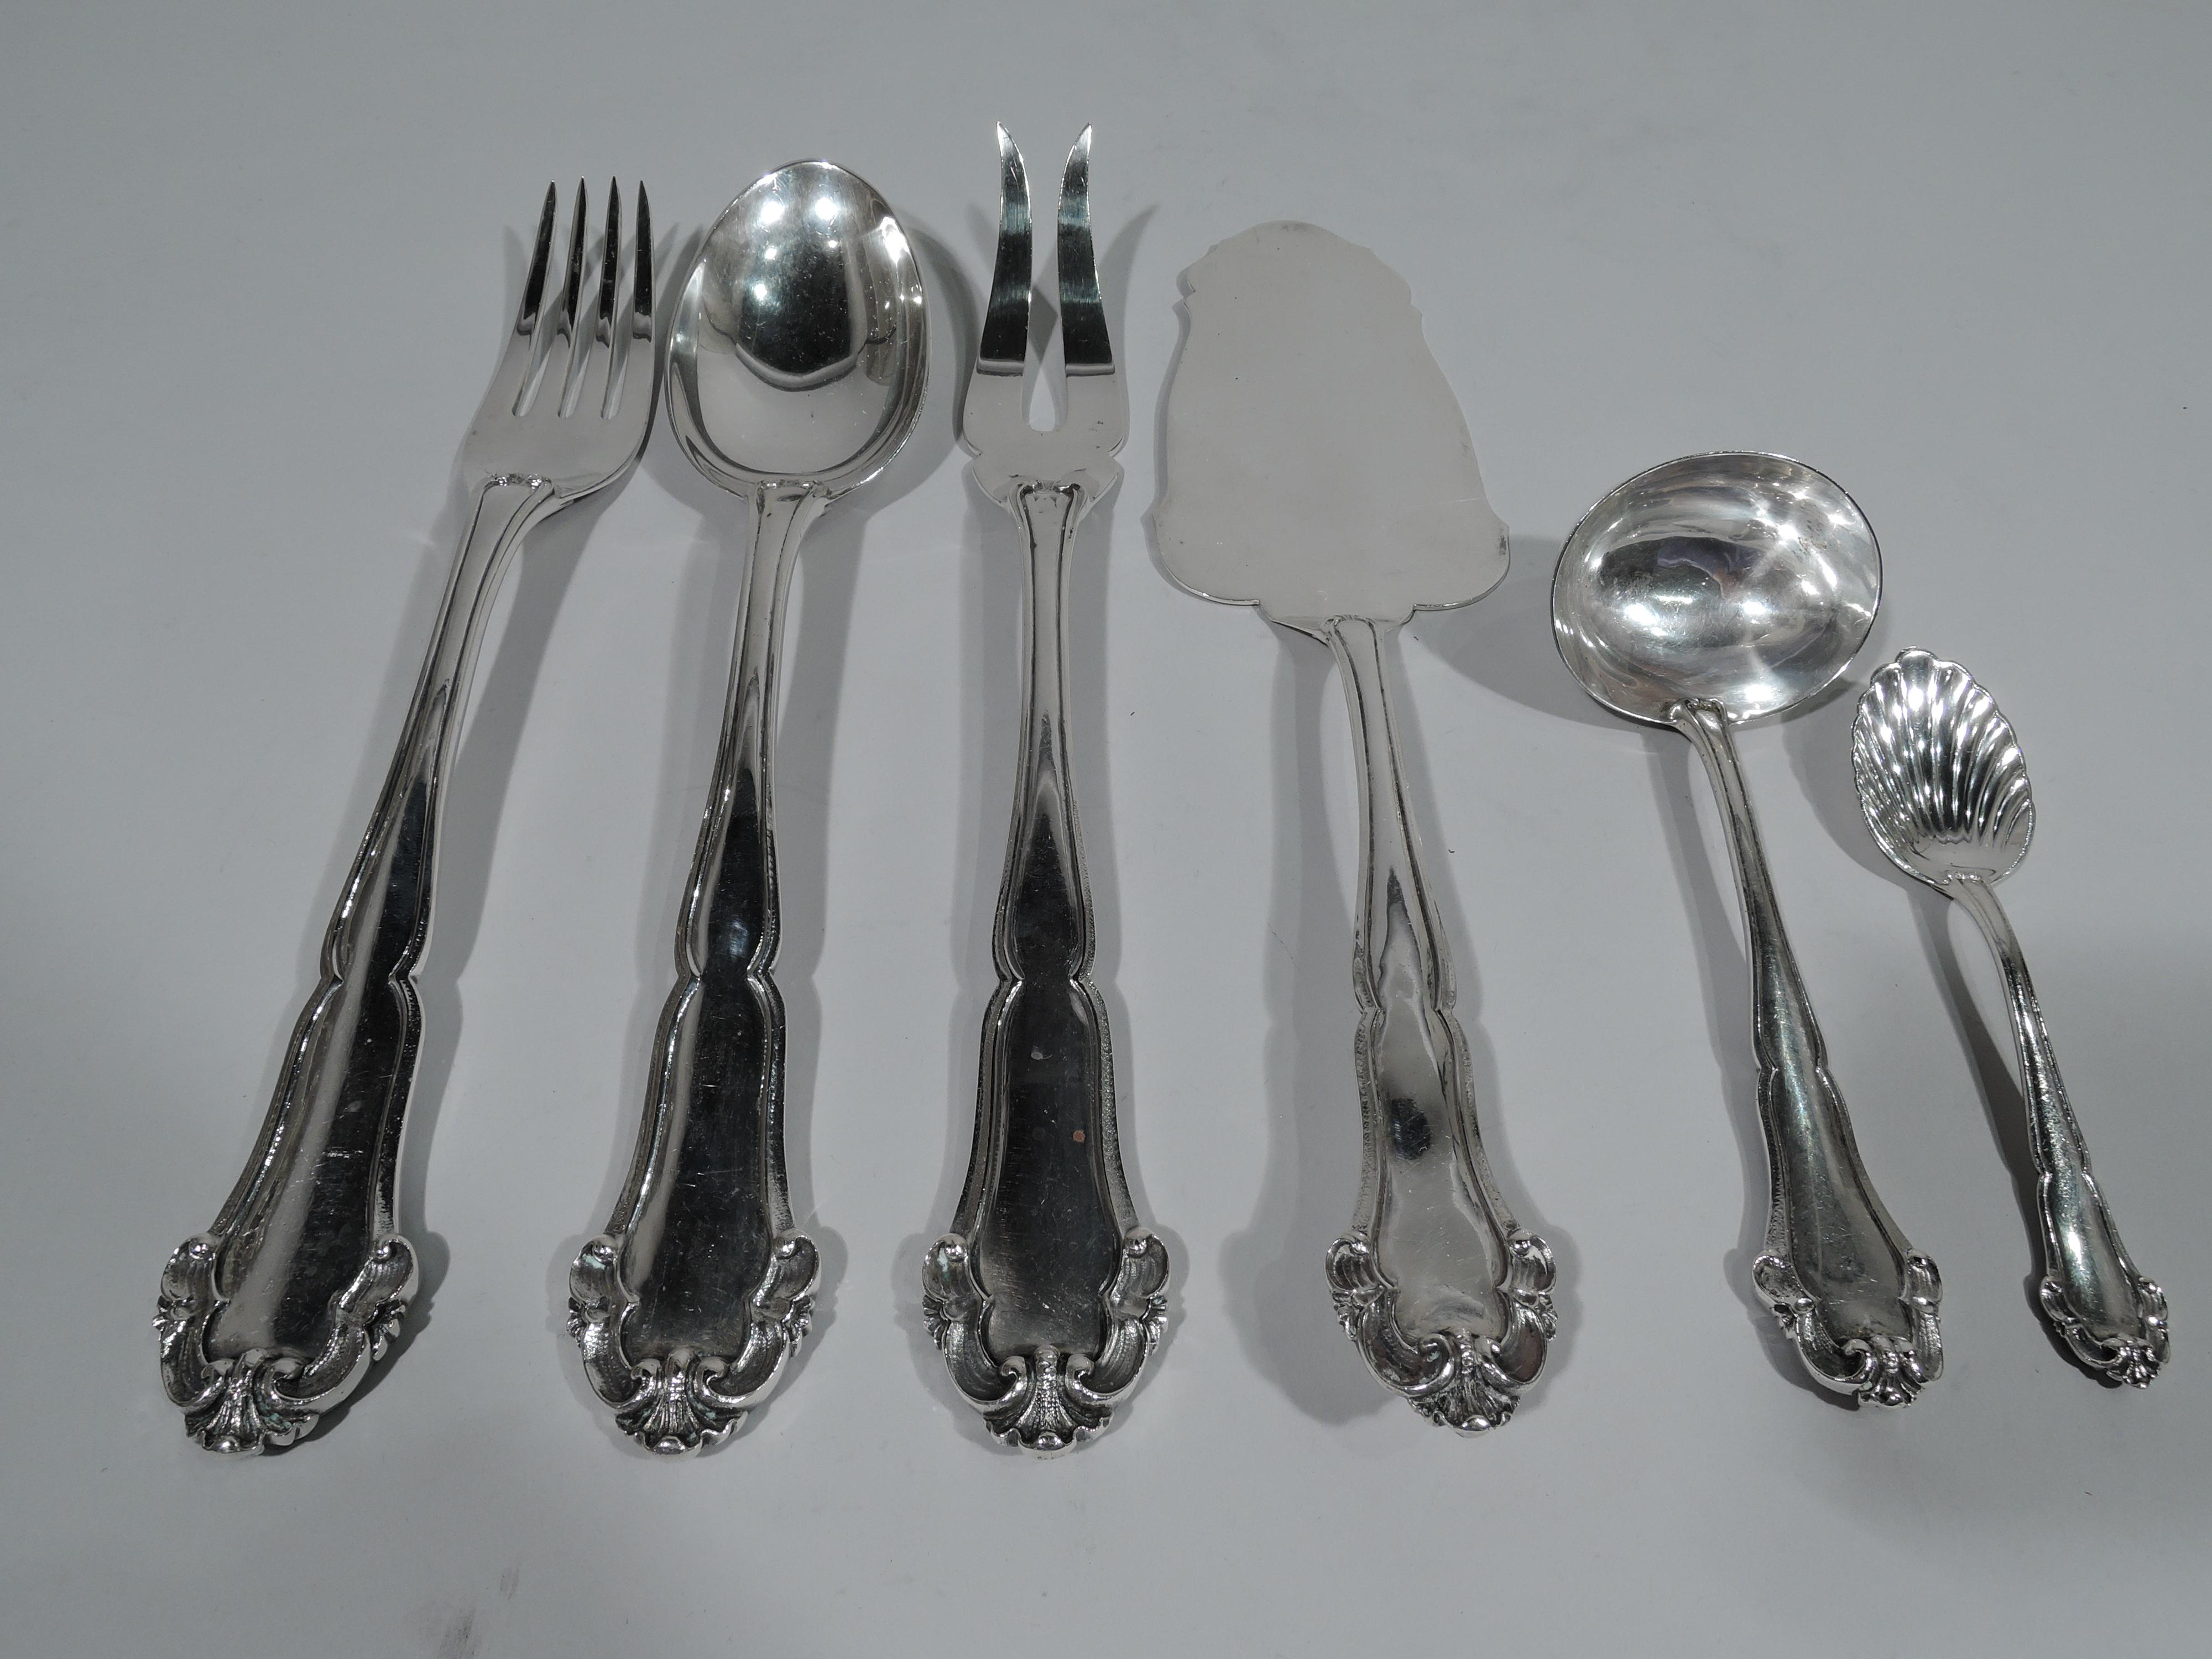 Desirable 800 silver dinner set for 12 in Grande Imperiale pattern. Made by Mario Buccellati in Italy. This set comprises 90 pieces (all dimensions in inches): Knives: 12 dinner knives (9 1/2) and 12 butter spreaders (6); Forks: 12 dinner forks (8